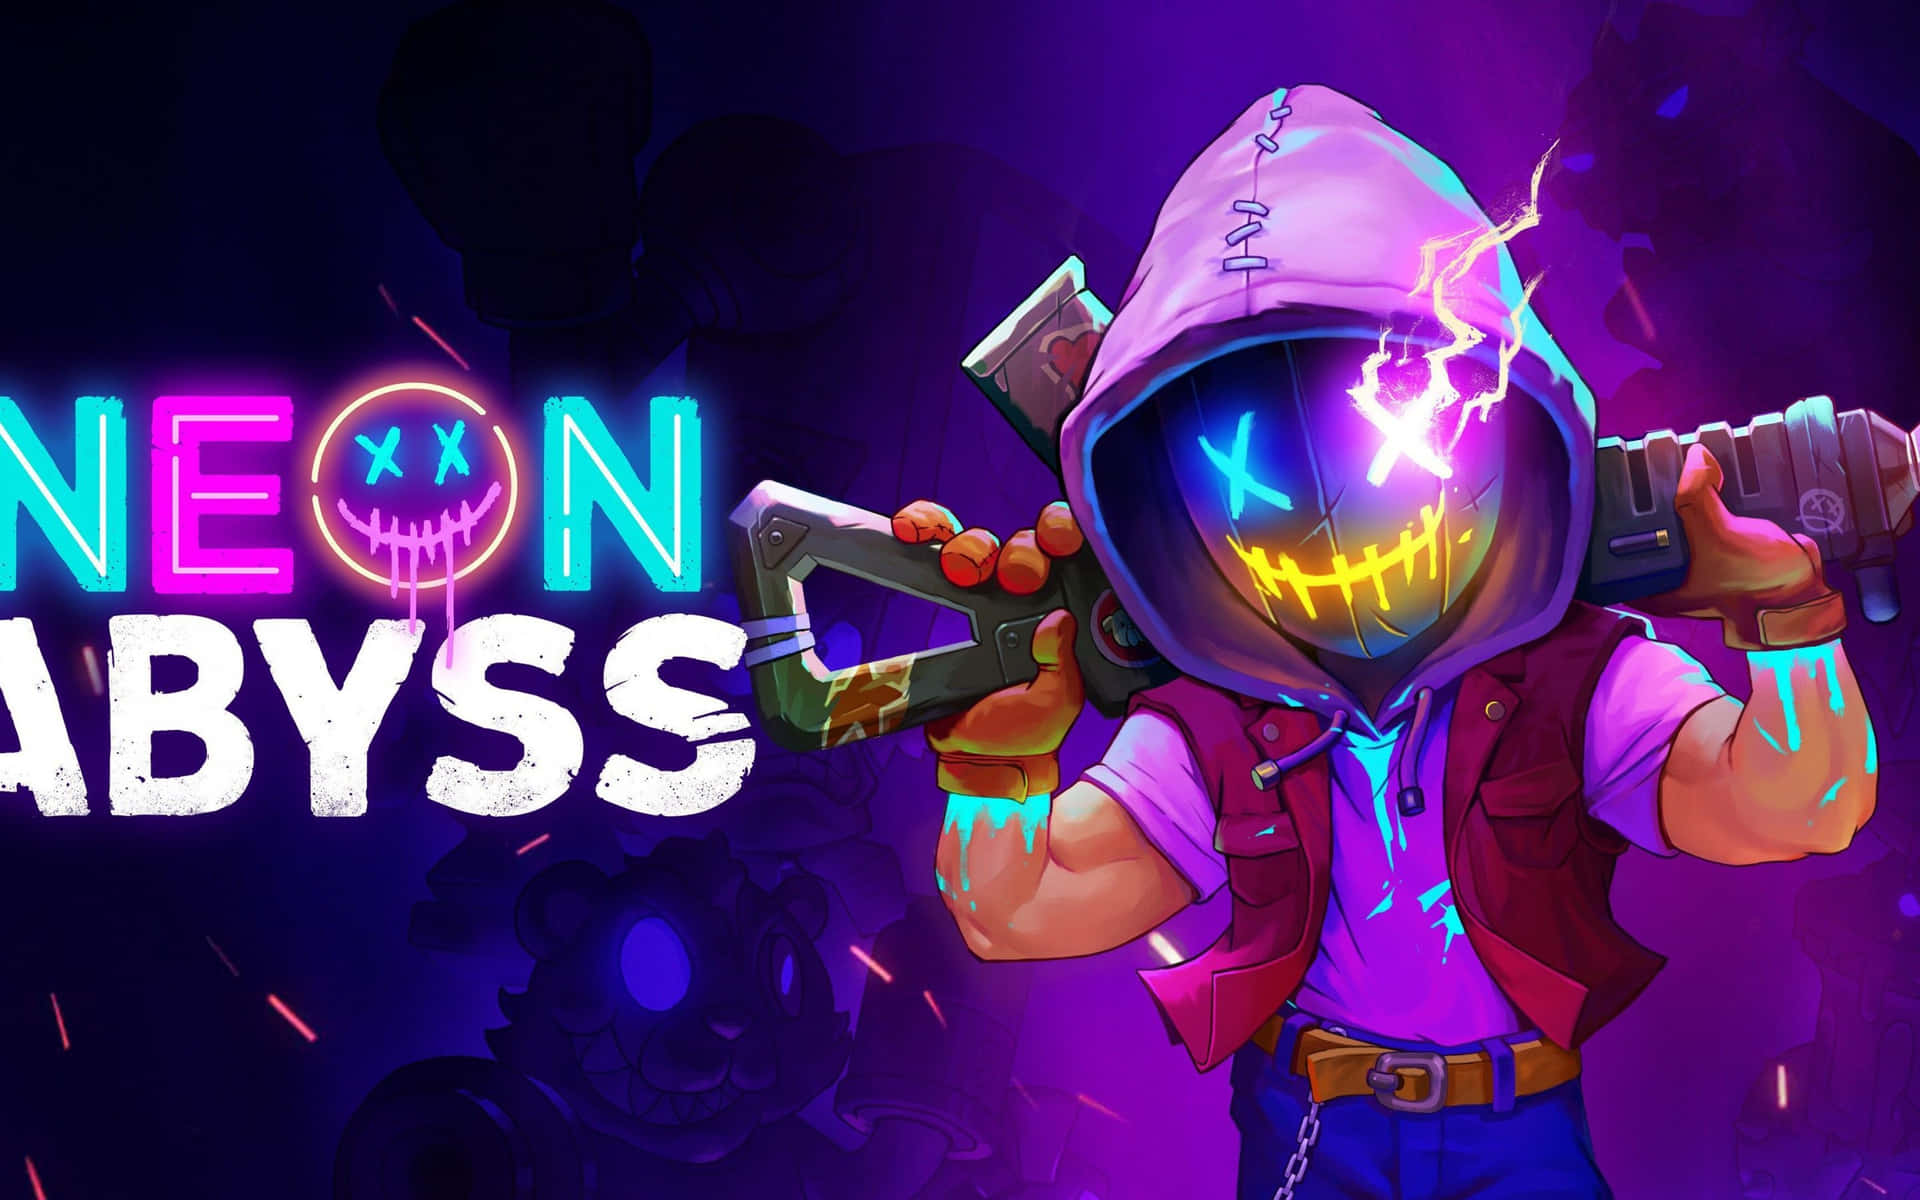 Neon Abyss - A Neon Game With A Character Holding A Gun